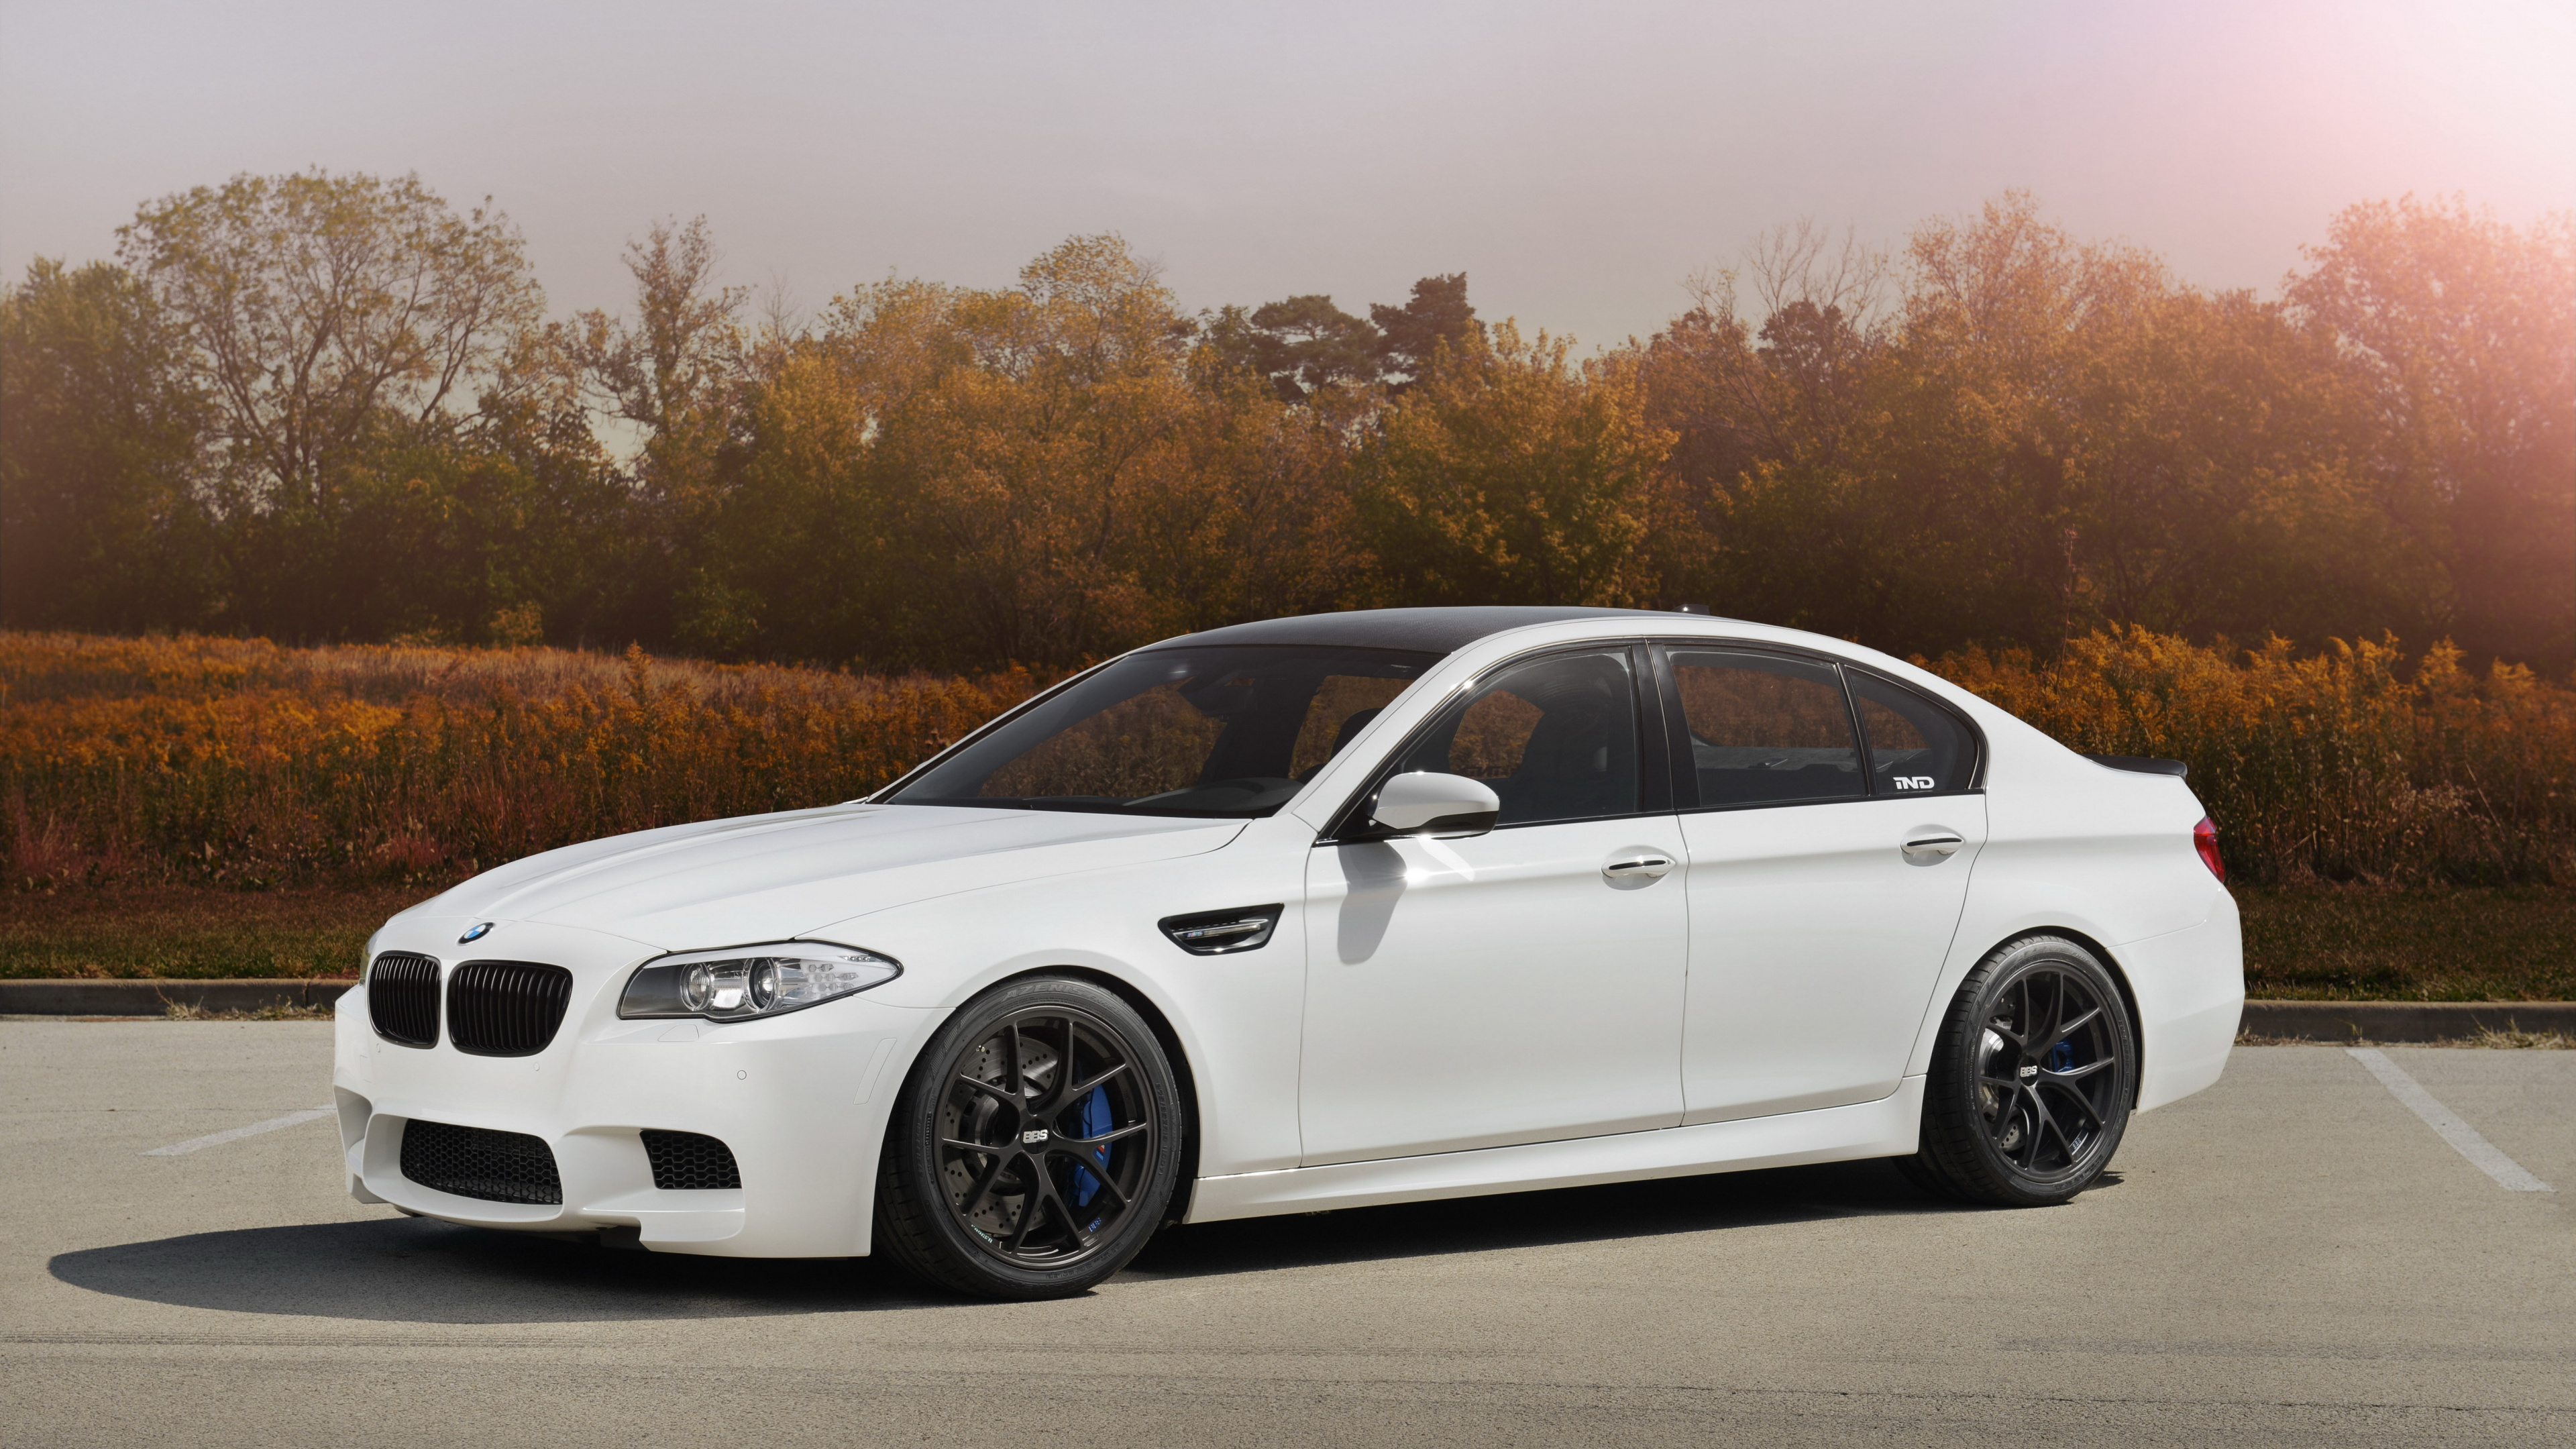 White Bmw m 3 Coupe Parked on Gray Asphalt Road During Daytime. Wallpaper in 3840x2160 Resolution